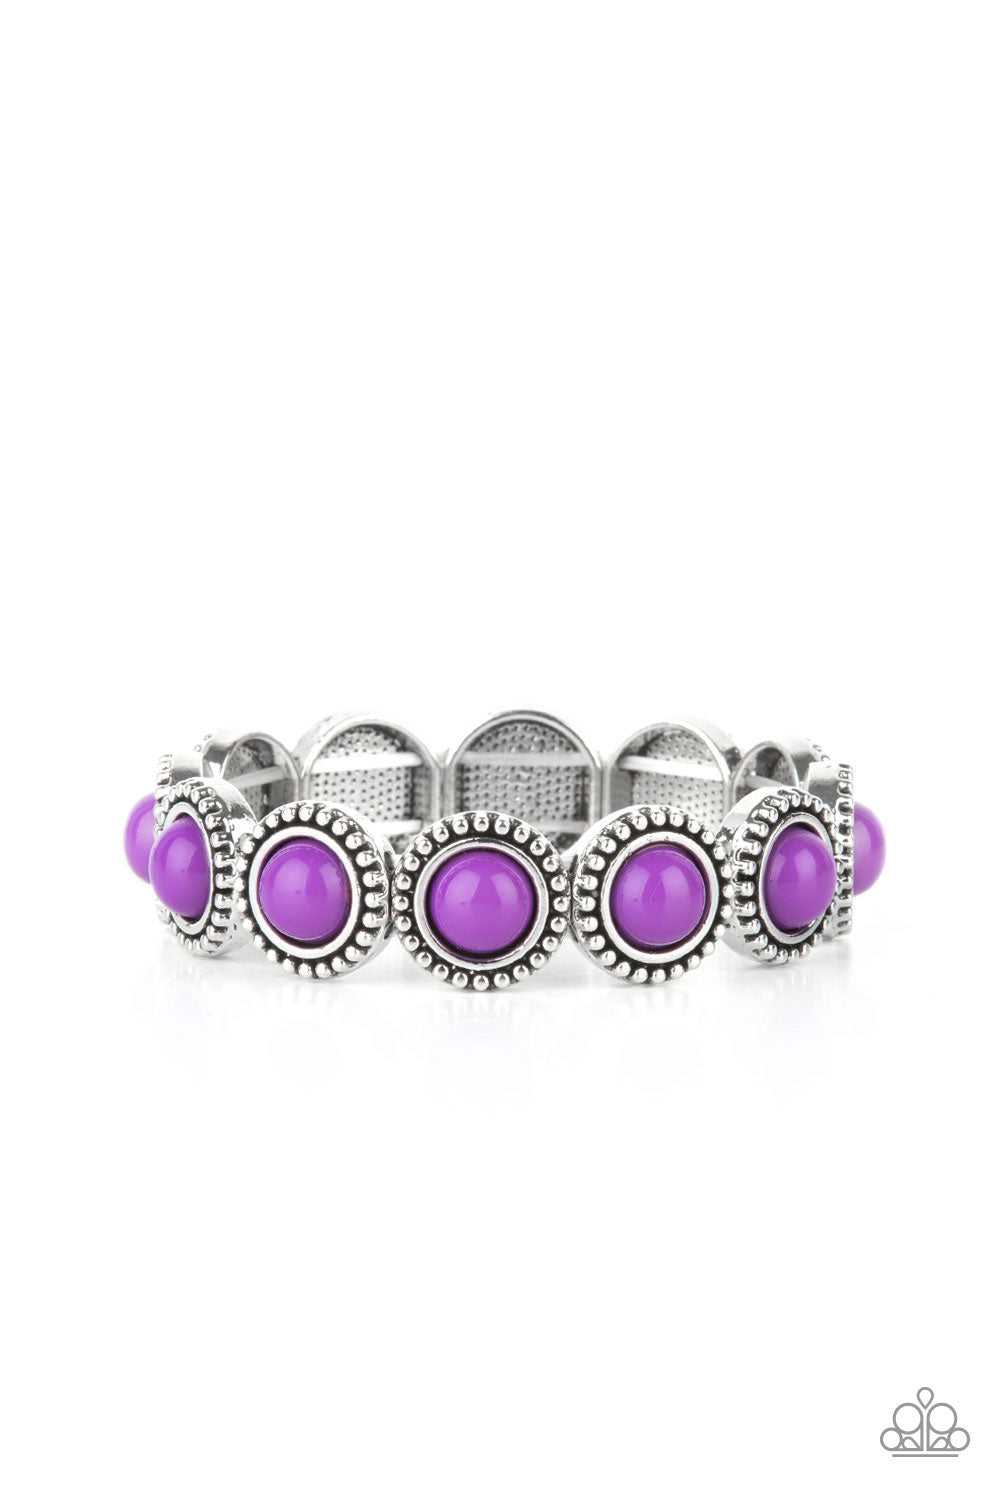 ​Polished Promenade - Purple and Silver Stretchy Bracelet - Paparazzi Accessories - 
Featuring an antiqued silver studded edge, silver frames encase polished purple beads. The eye-catching series of fanciful beads are threaded along a stretchy band and promenade around the wrist for a whimsical look. Sold as one individual bracelet.
